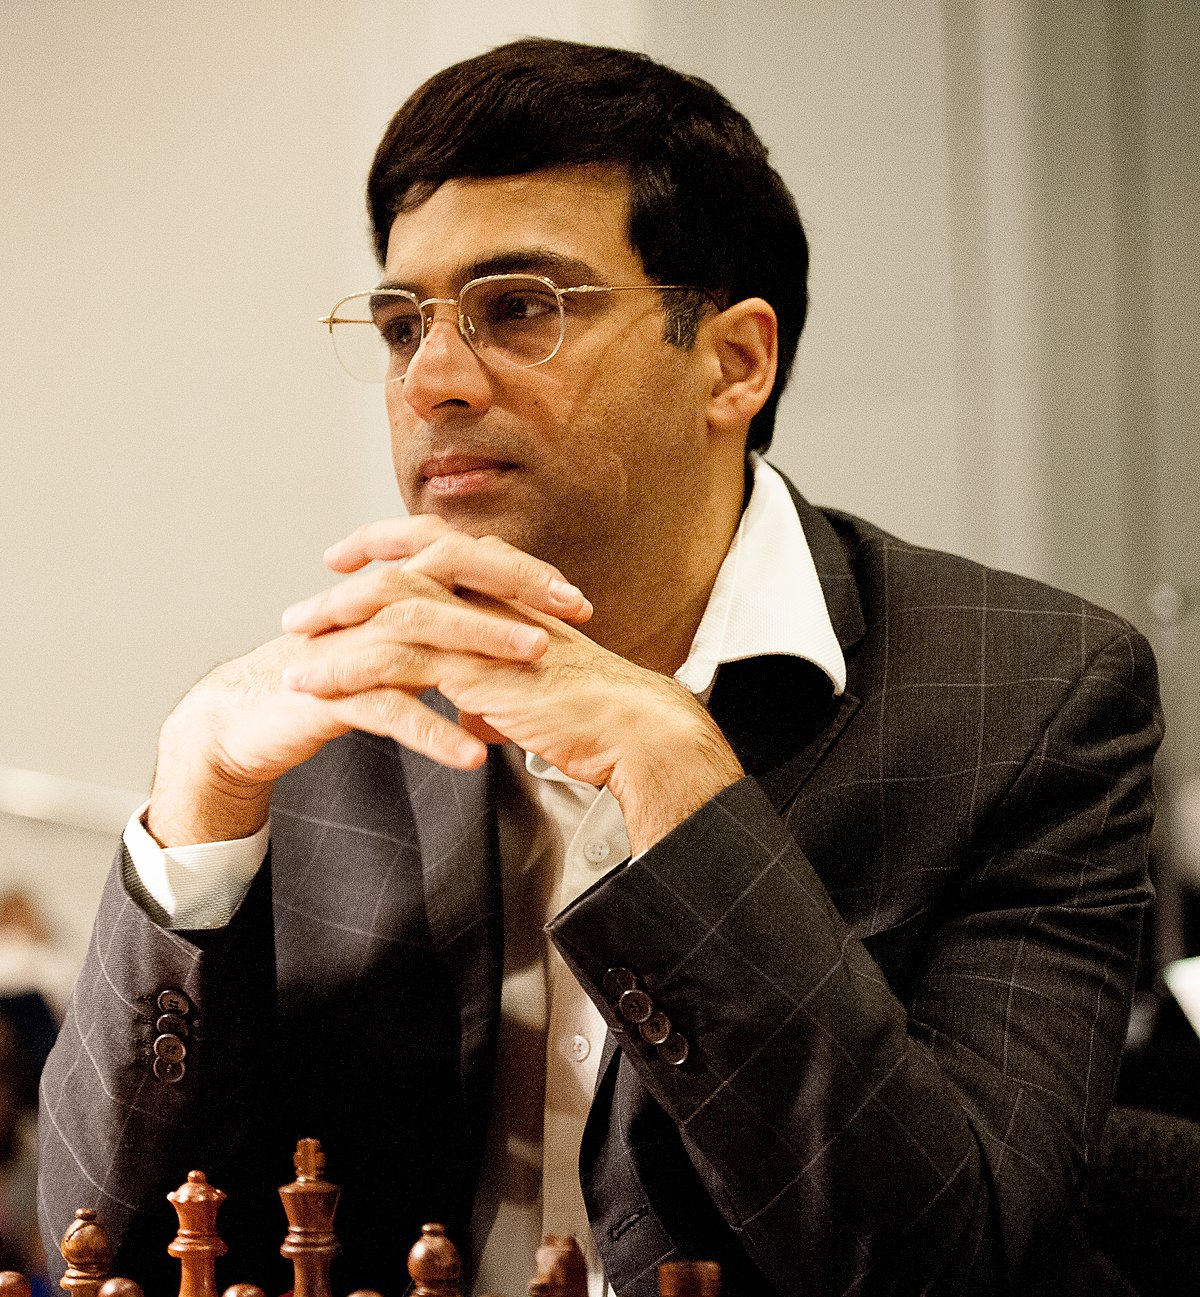 Viswanathan Anand - If revenge motivates you, go for it!